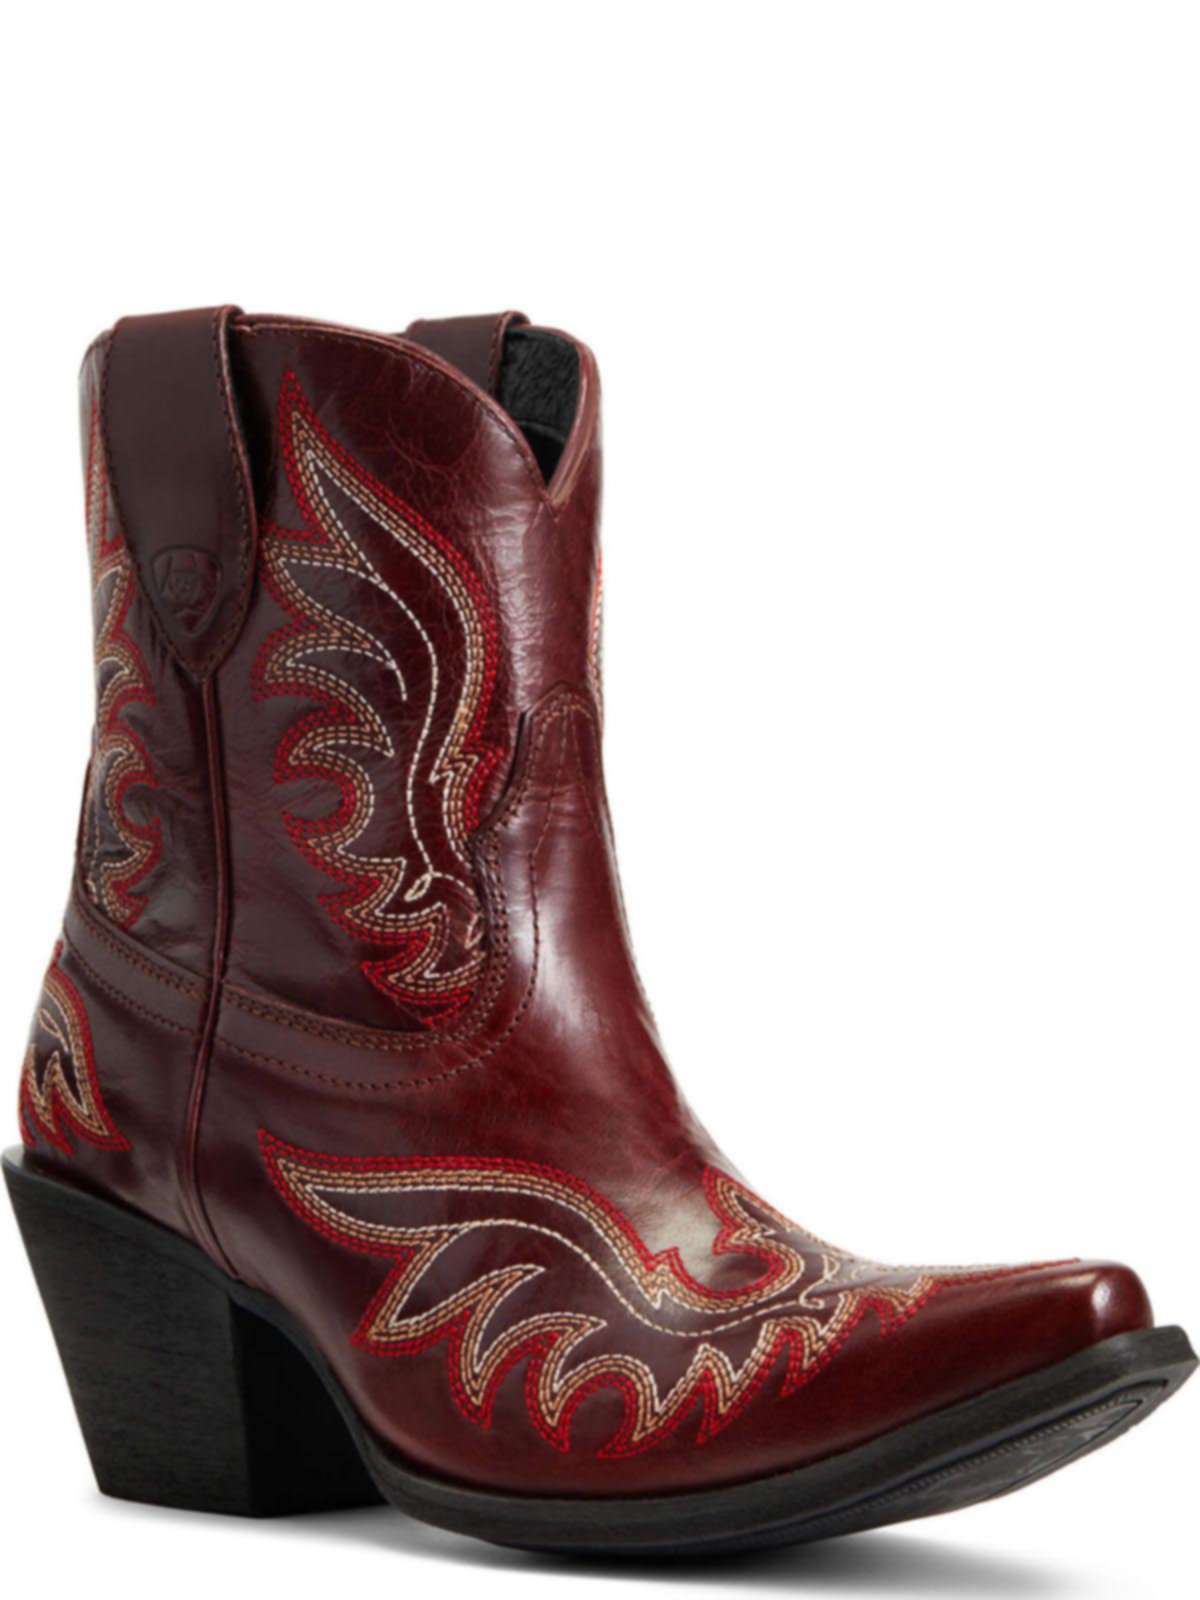 Shop Ariat Womens Chandler Boot 10040337 | Save 20% + Free Shipping ...